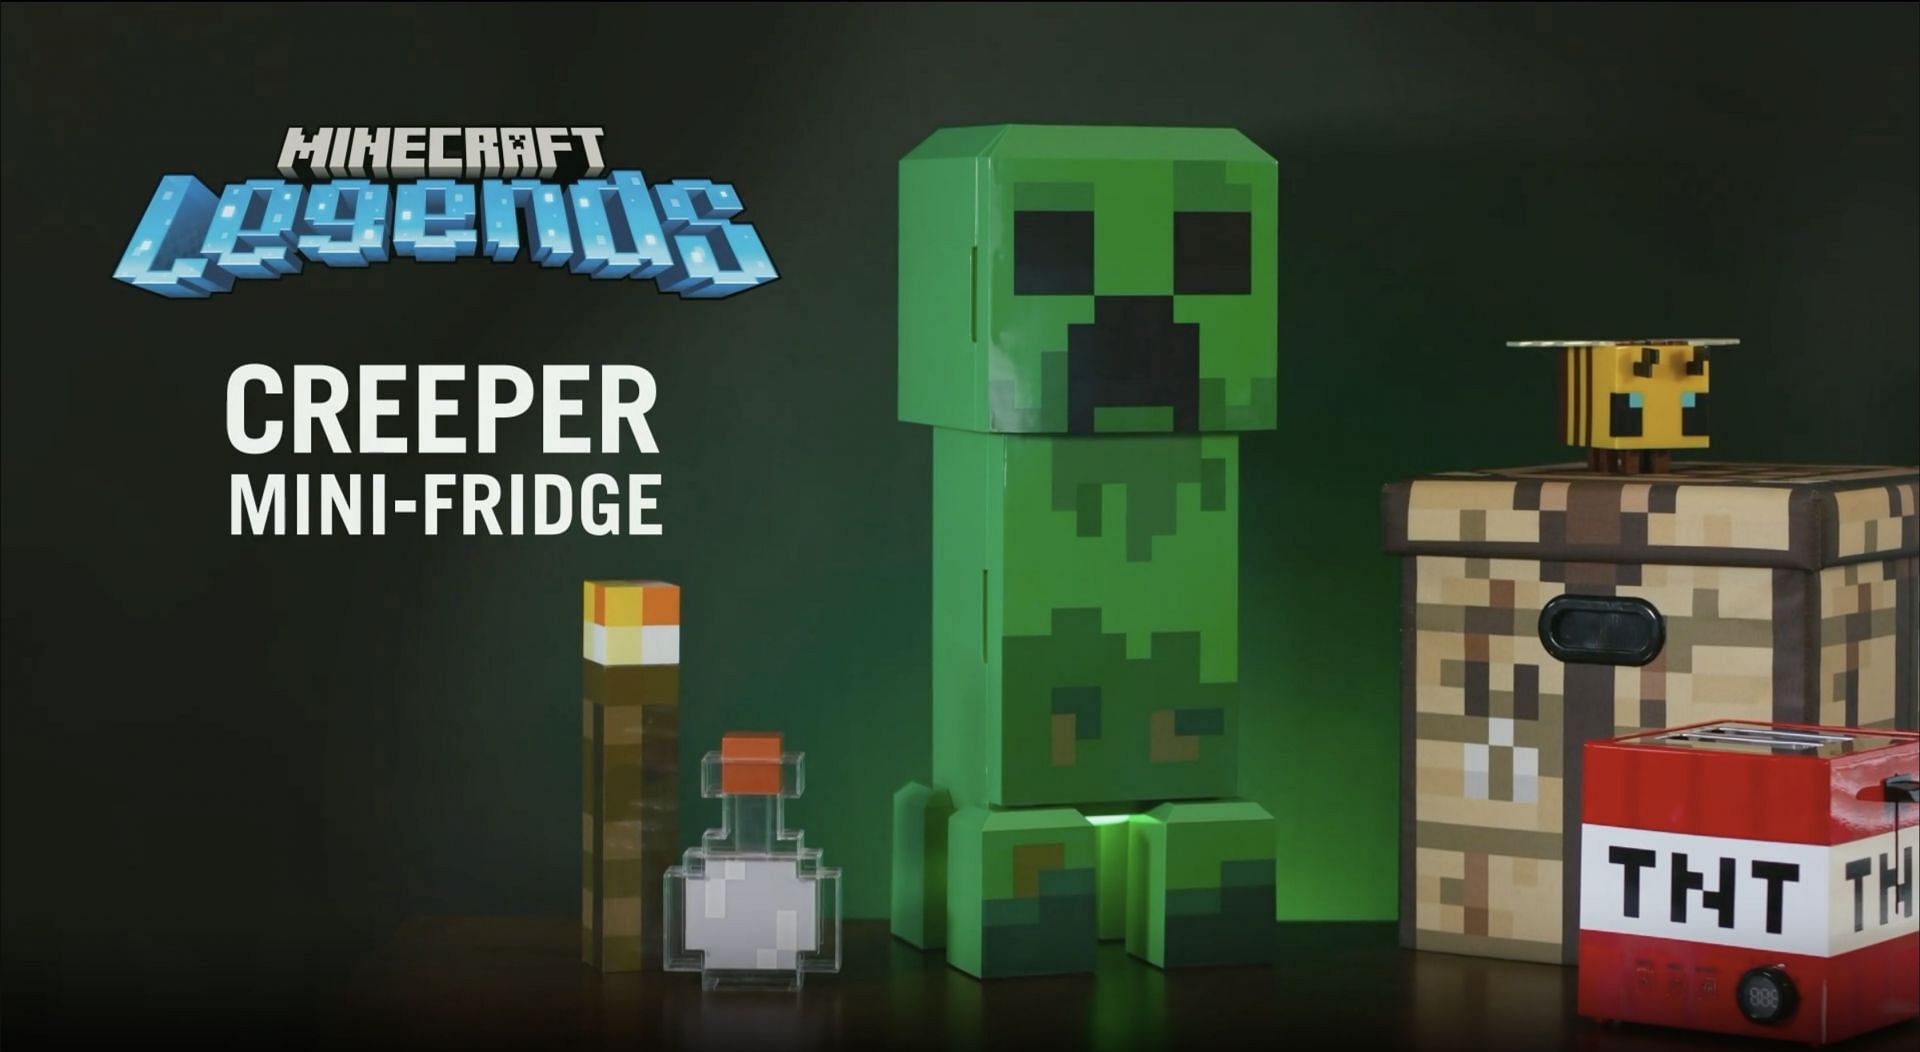 Price Errors on X: $113 off Minecraft Creeper Mini Fridge Normally retails  for $168 but on sale at Walmart now for only $55. Resells on  around  $100, also risk free because